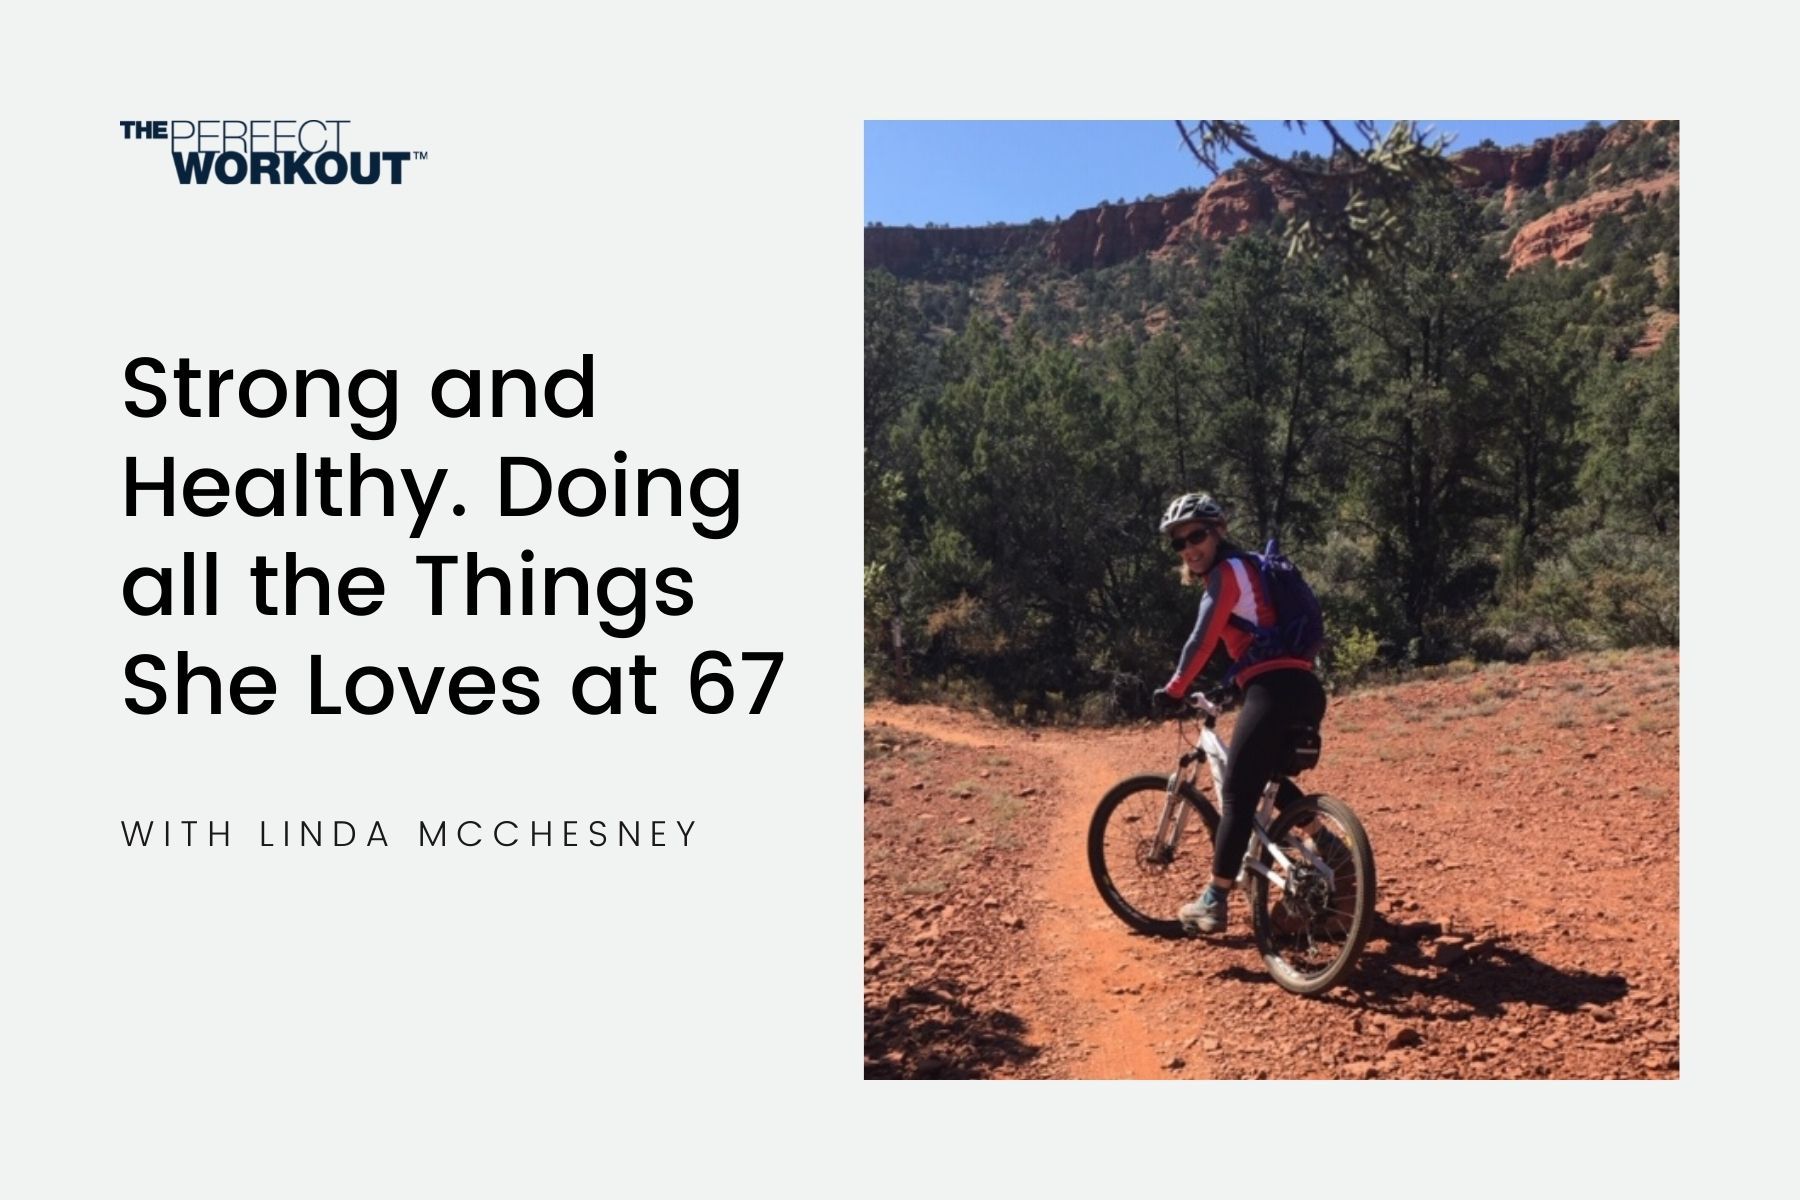 Strong and Healthy: All the Things She Loves at 67